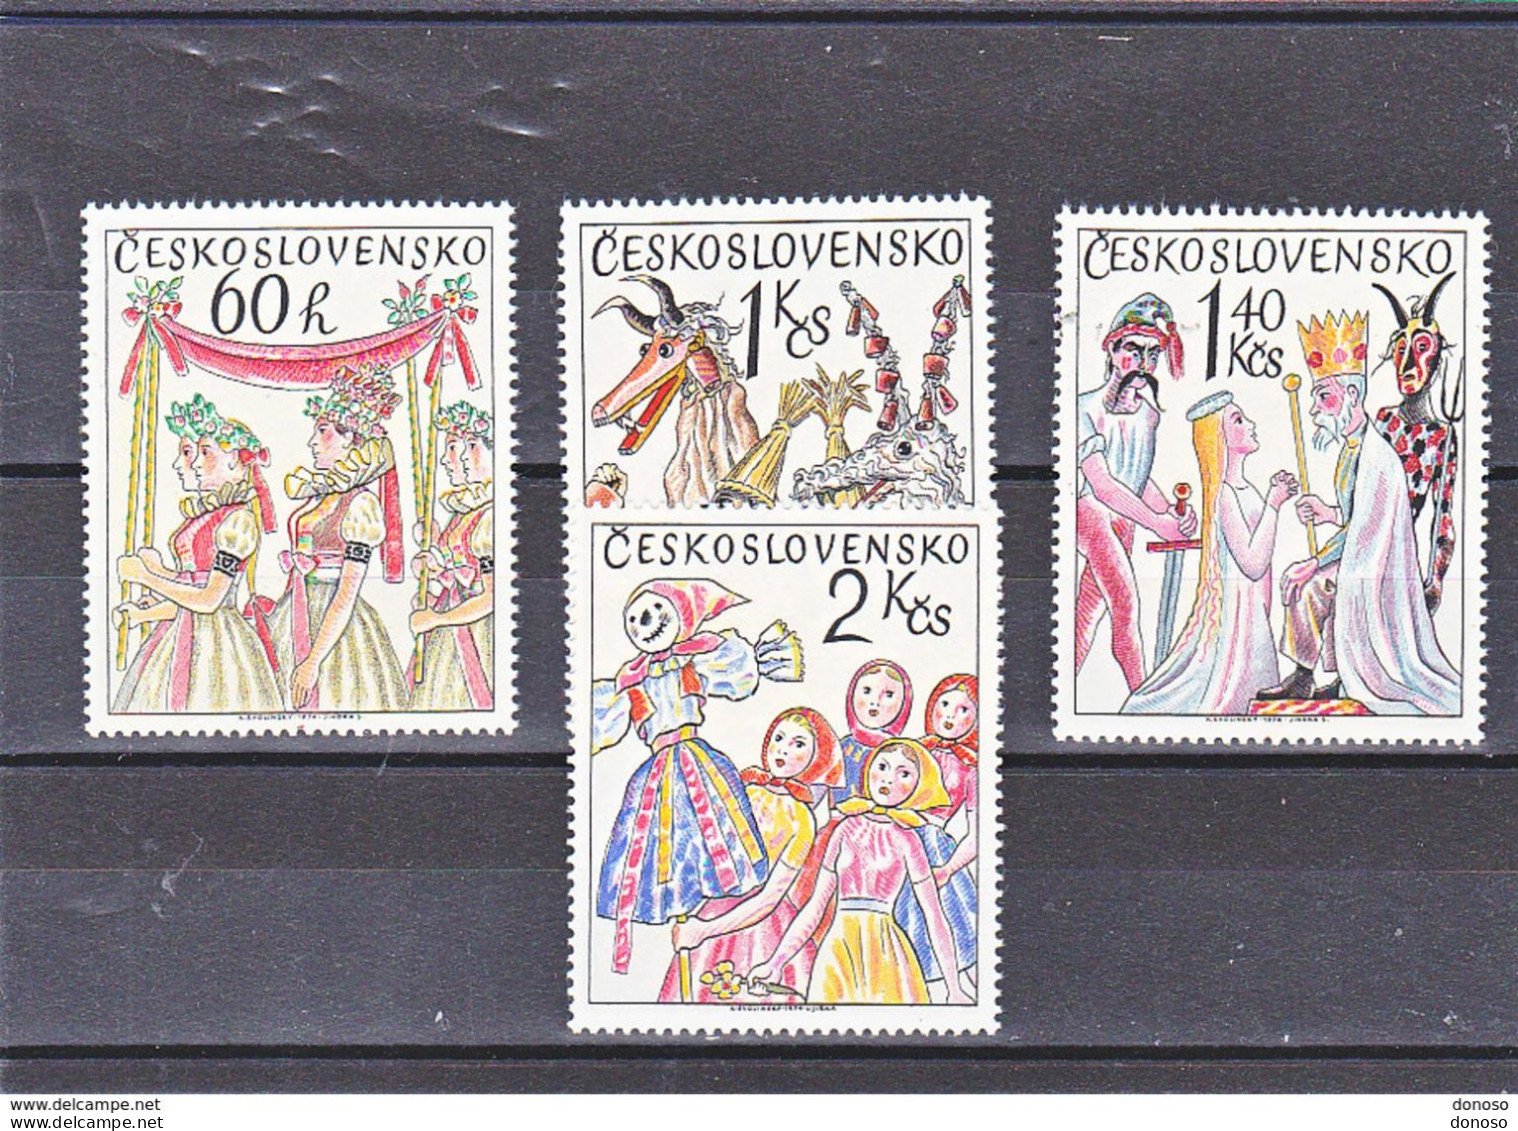 TCHECOSLOVAQUIE 1975 COUTUMES POPULAIRES Yvert 2091-2094, Michel 2248-2251 NEUF** MNH Cote 6 Euros - Neufs